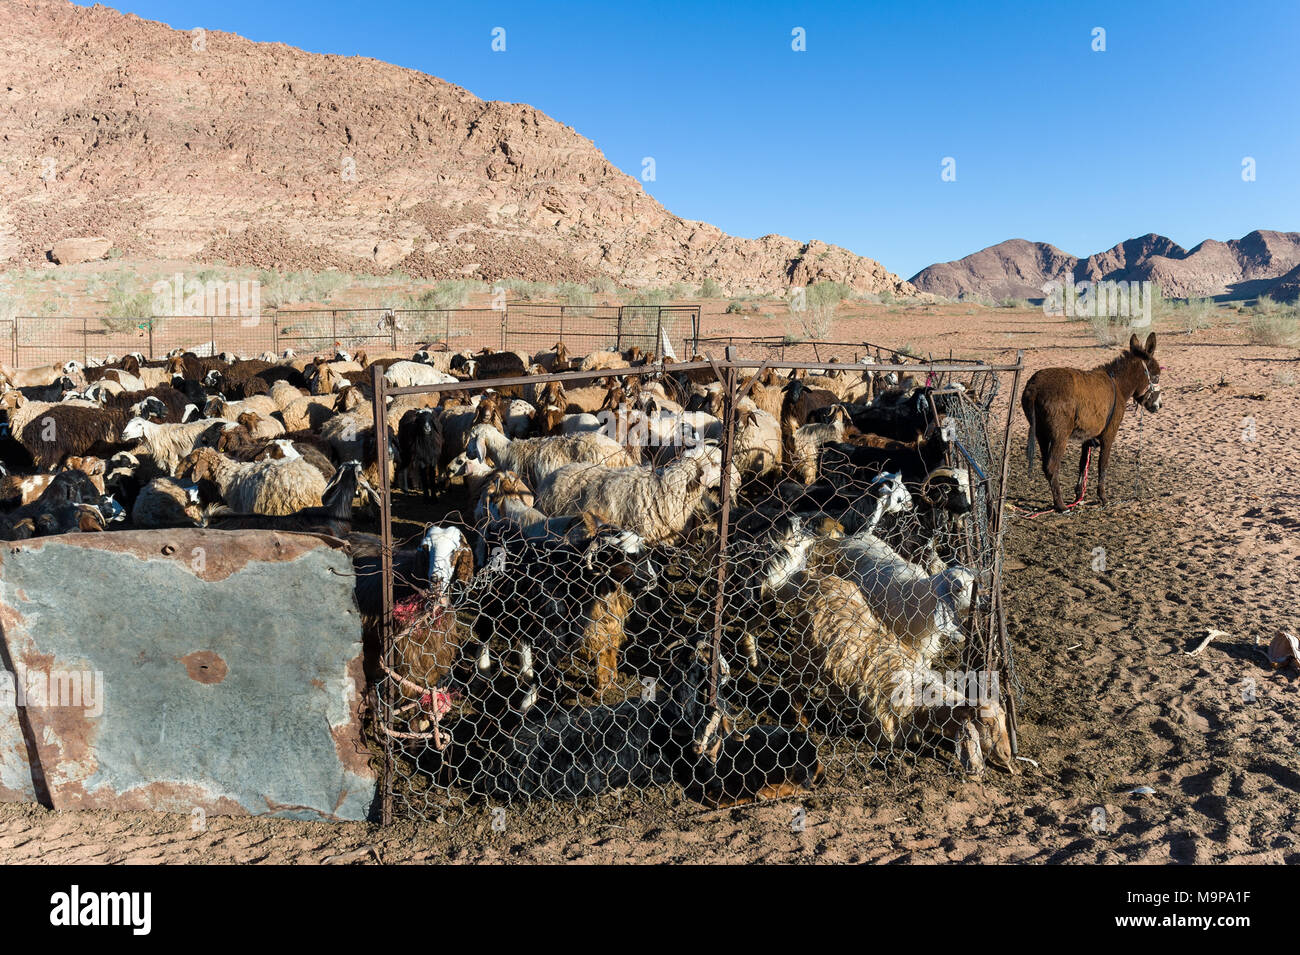 Stock breading of goat and sheep in the Wadi Rum. The Valley of the Moon, is a valley cut into the sandstone and granite rock in southern Jordan. Stock Photo